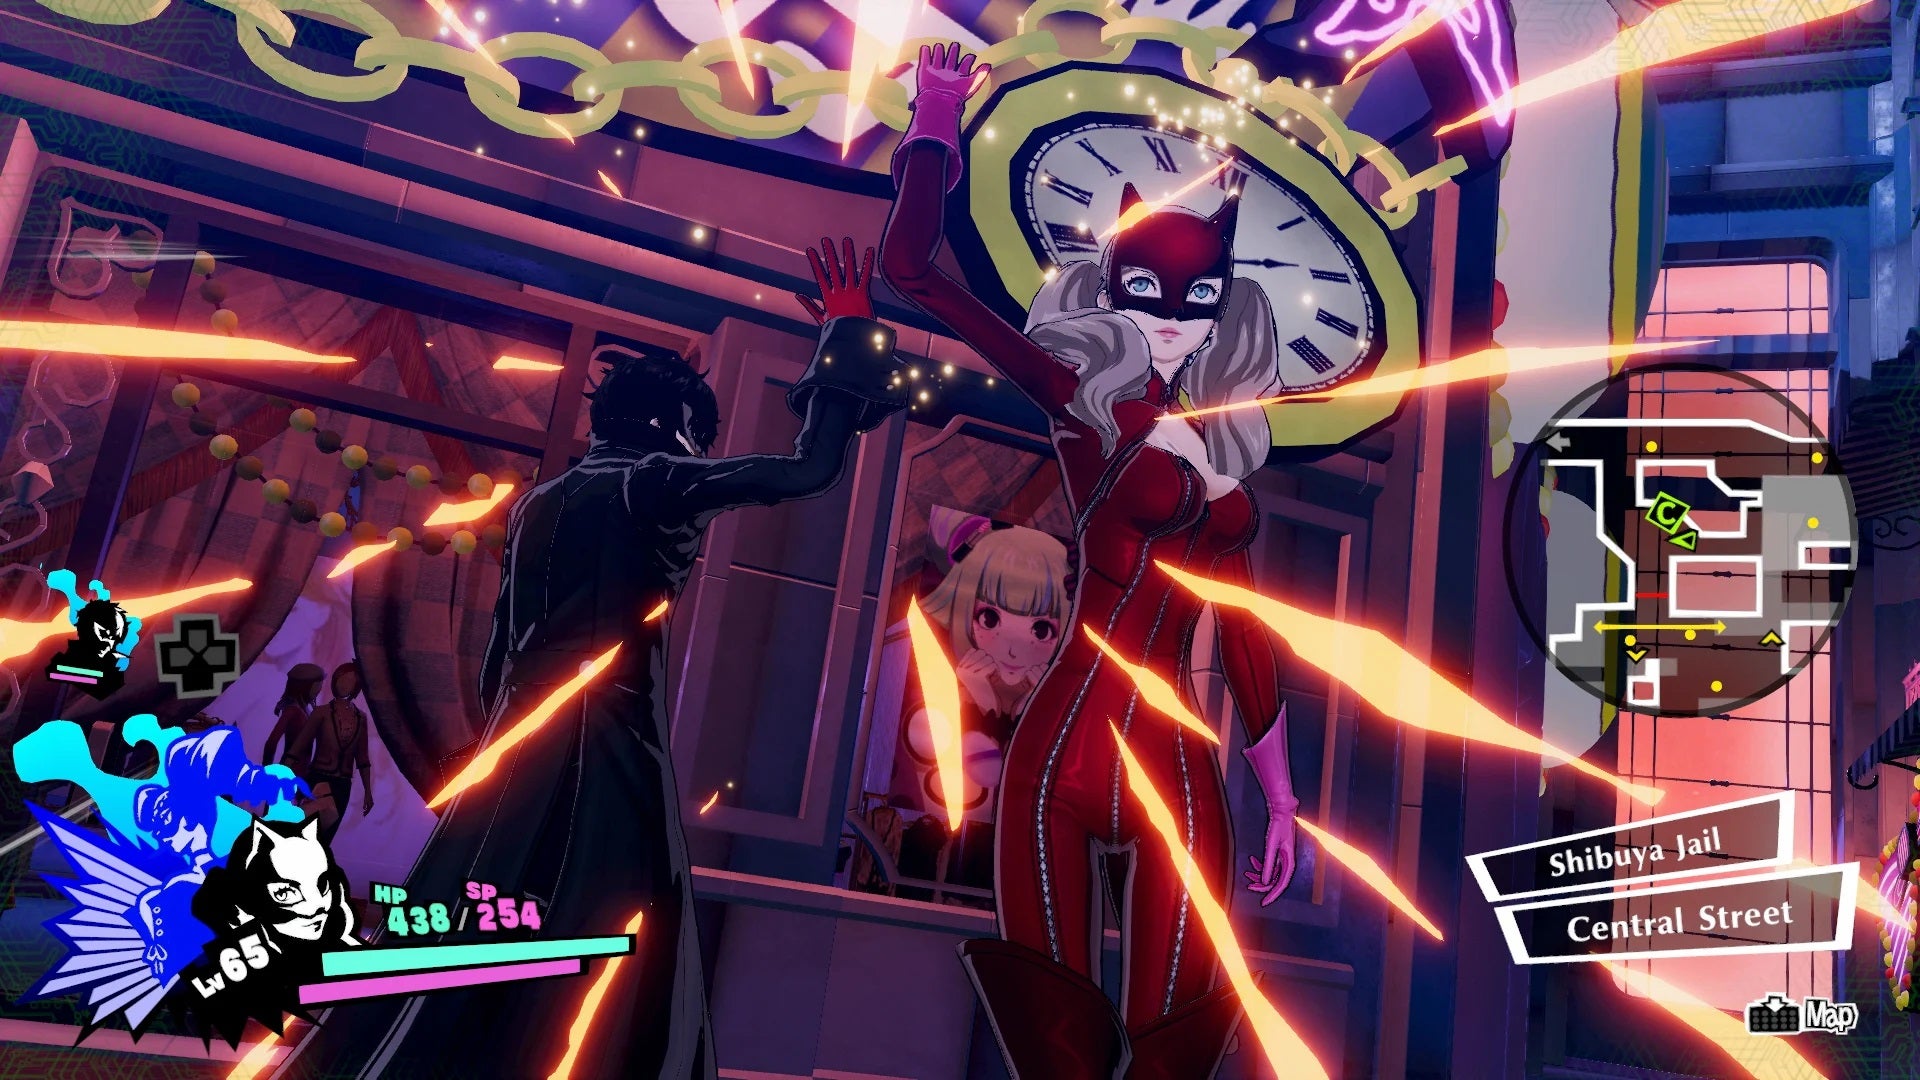 Persona 5 Strikers is coming to PC in February | Rock Paper Shotgun